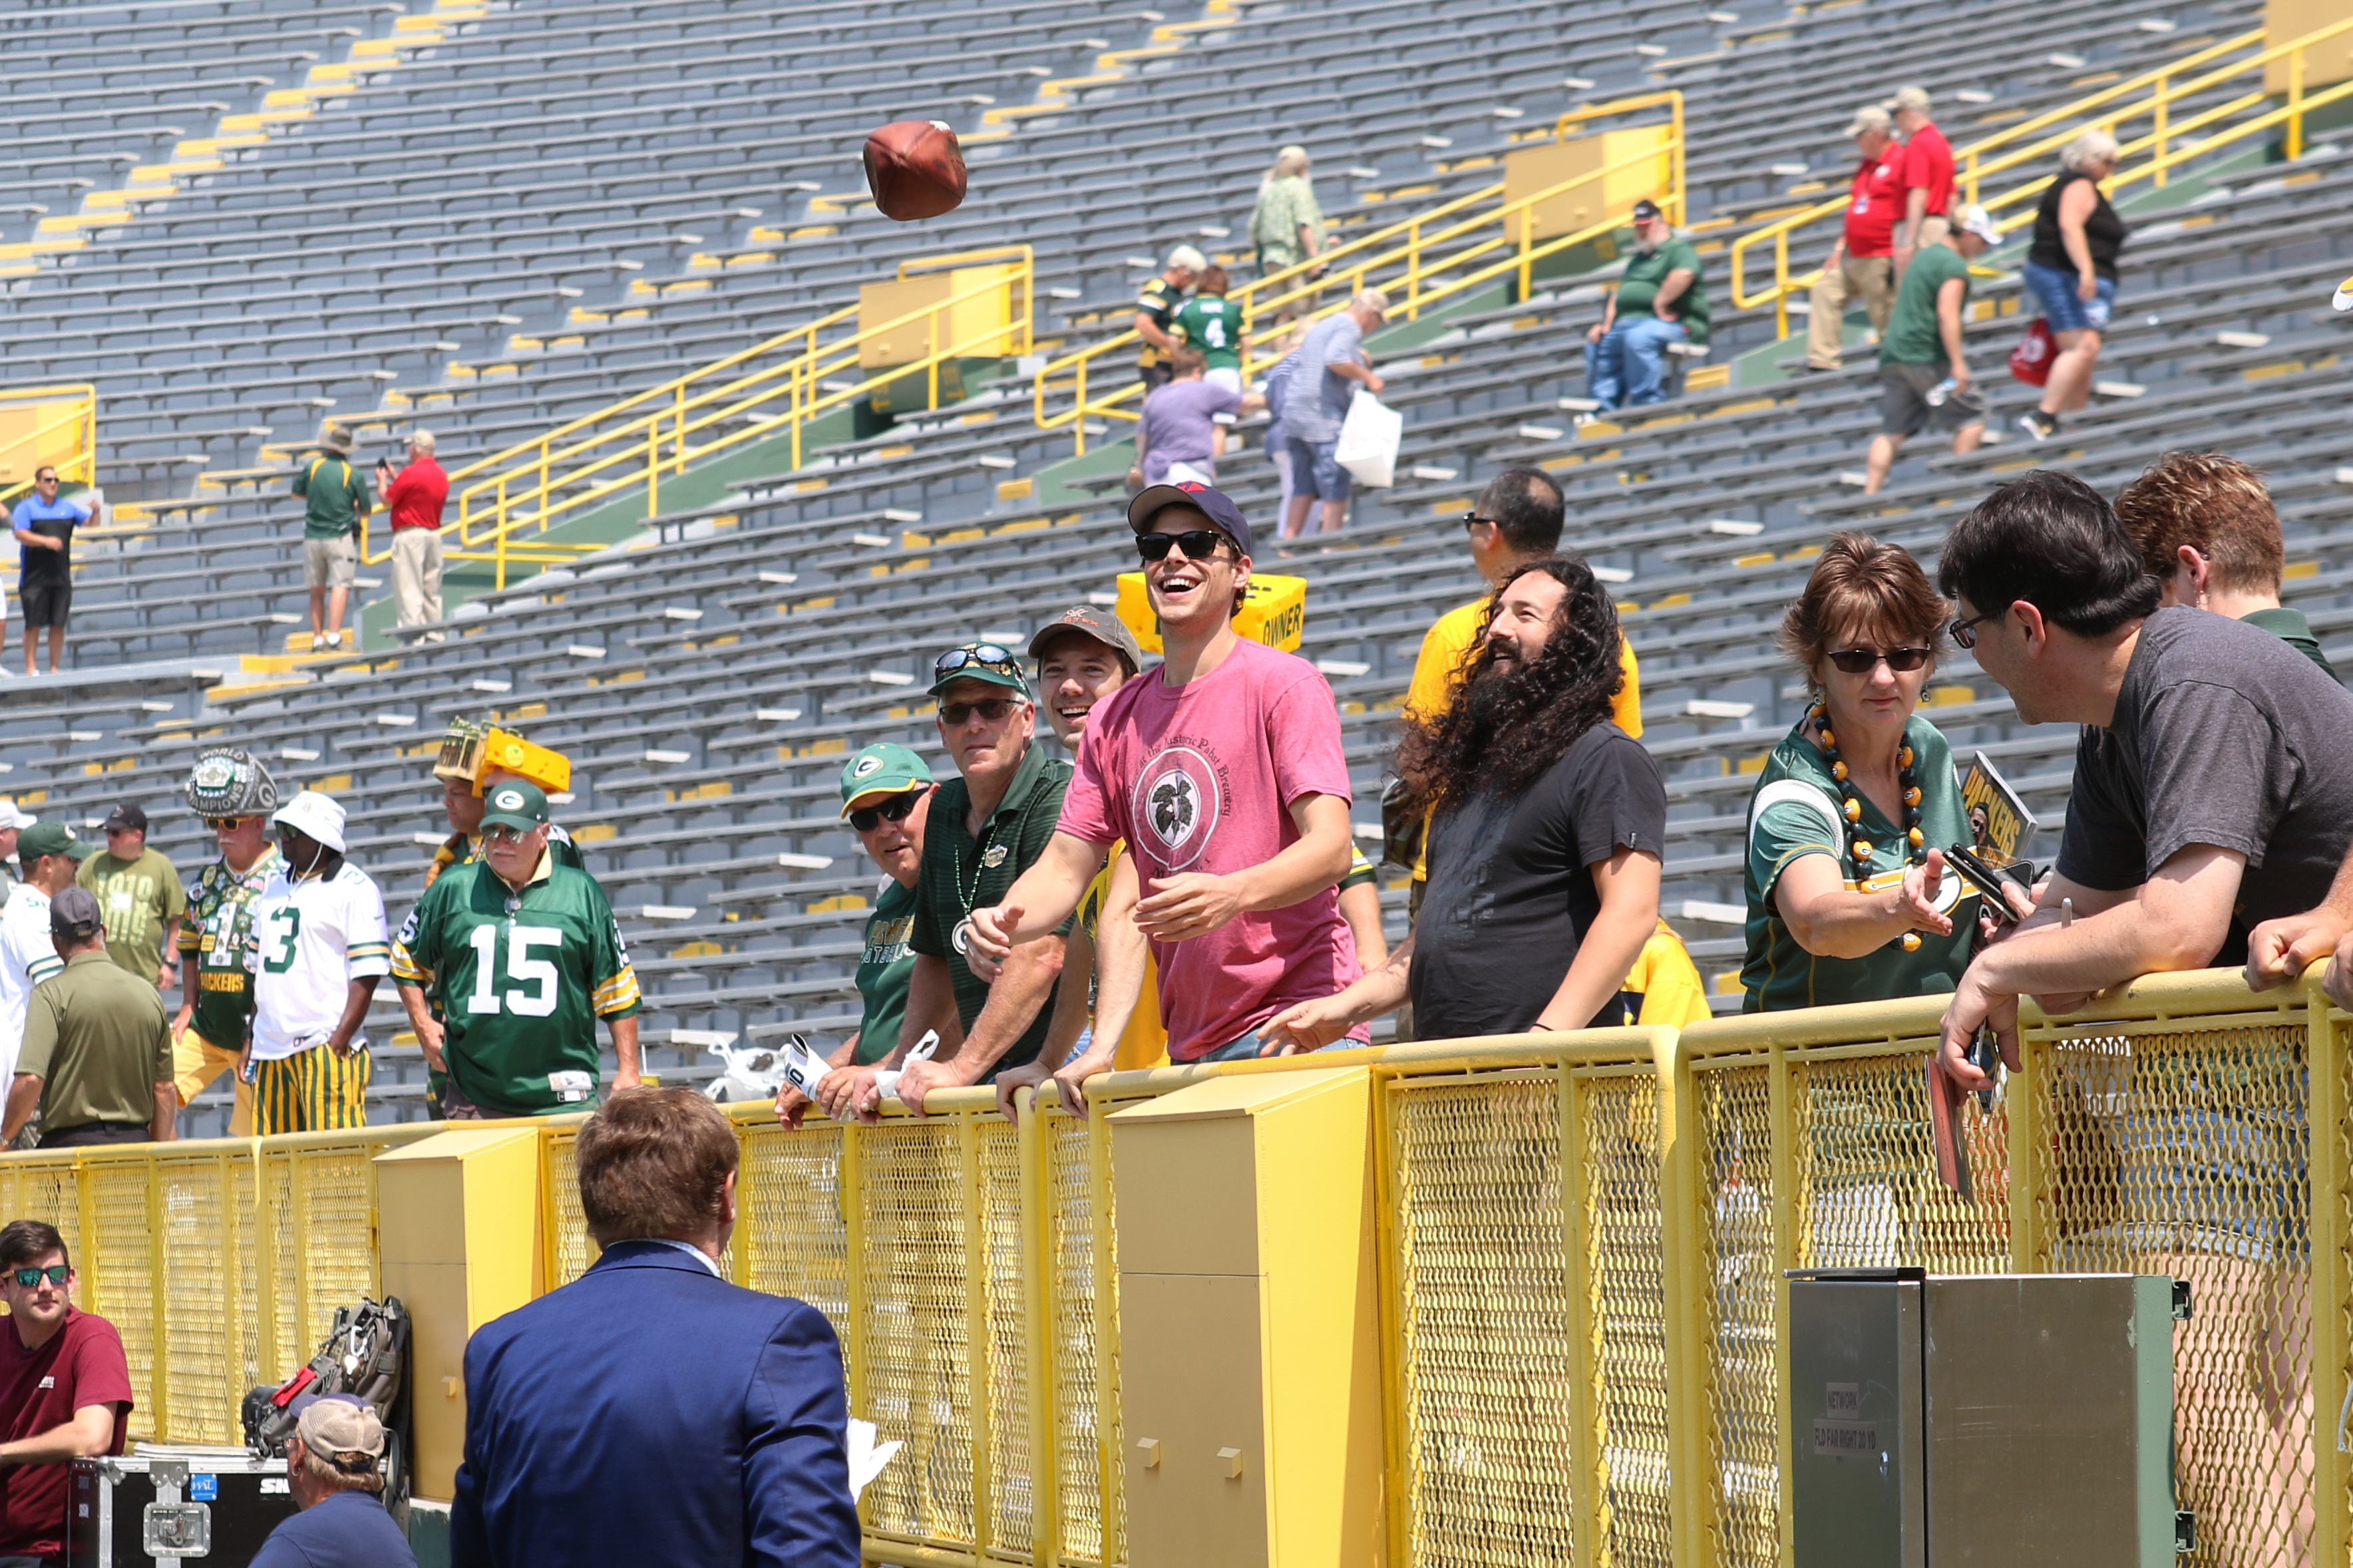 A Breakdown of How Shareholders Pay the Green Bay Packers